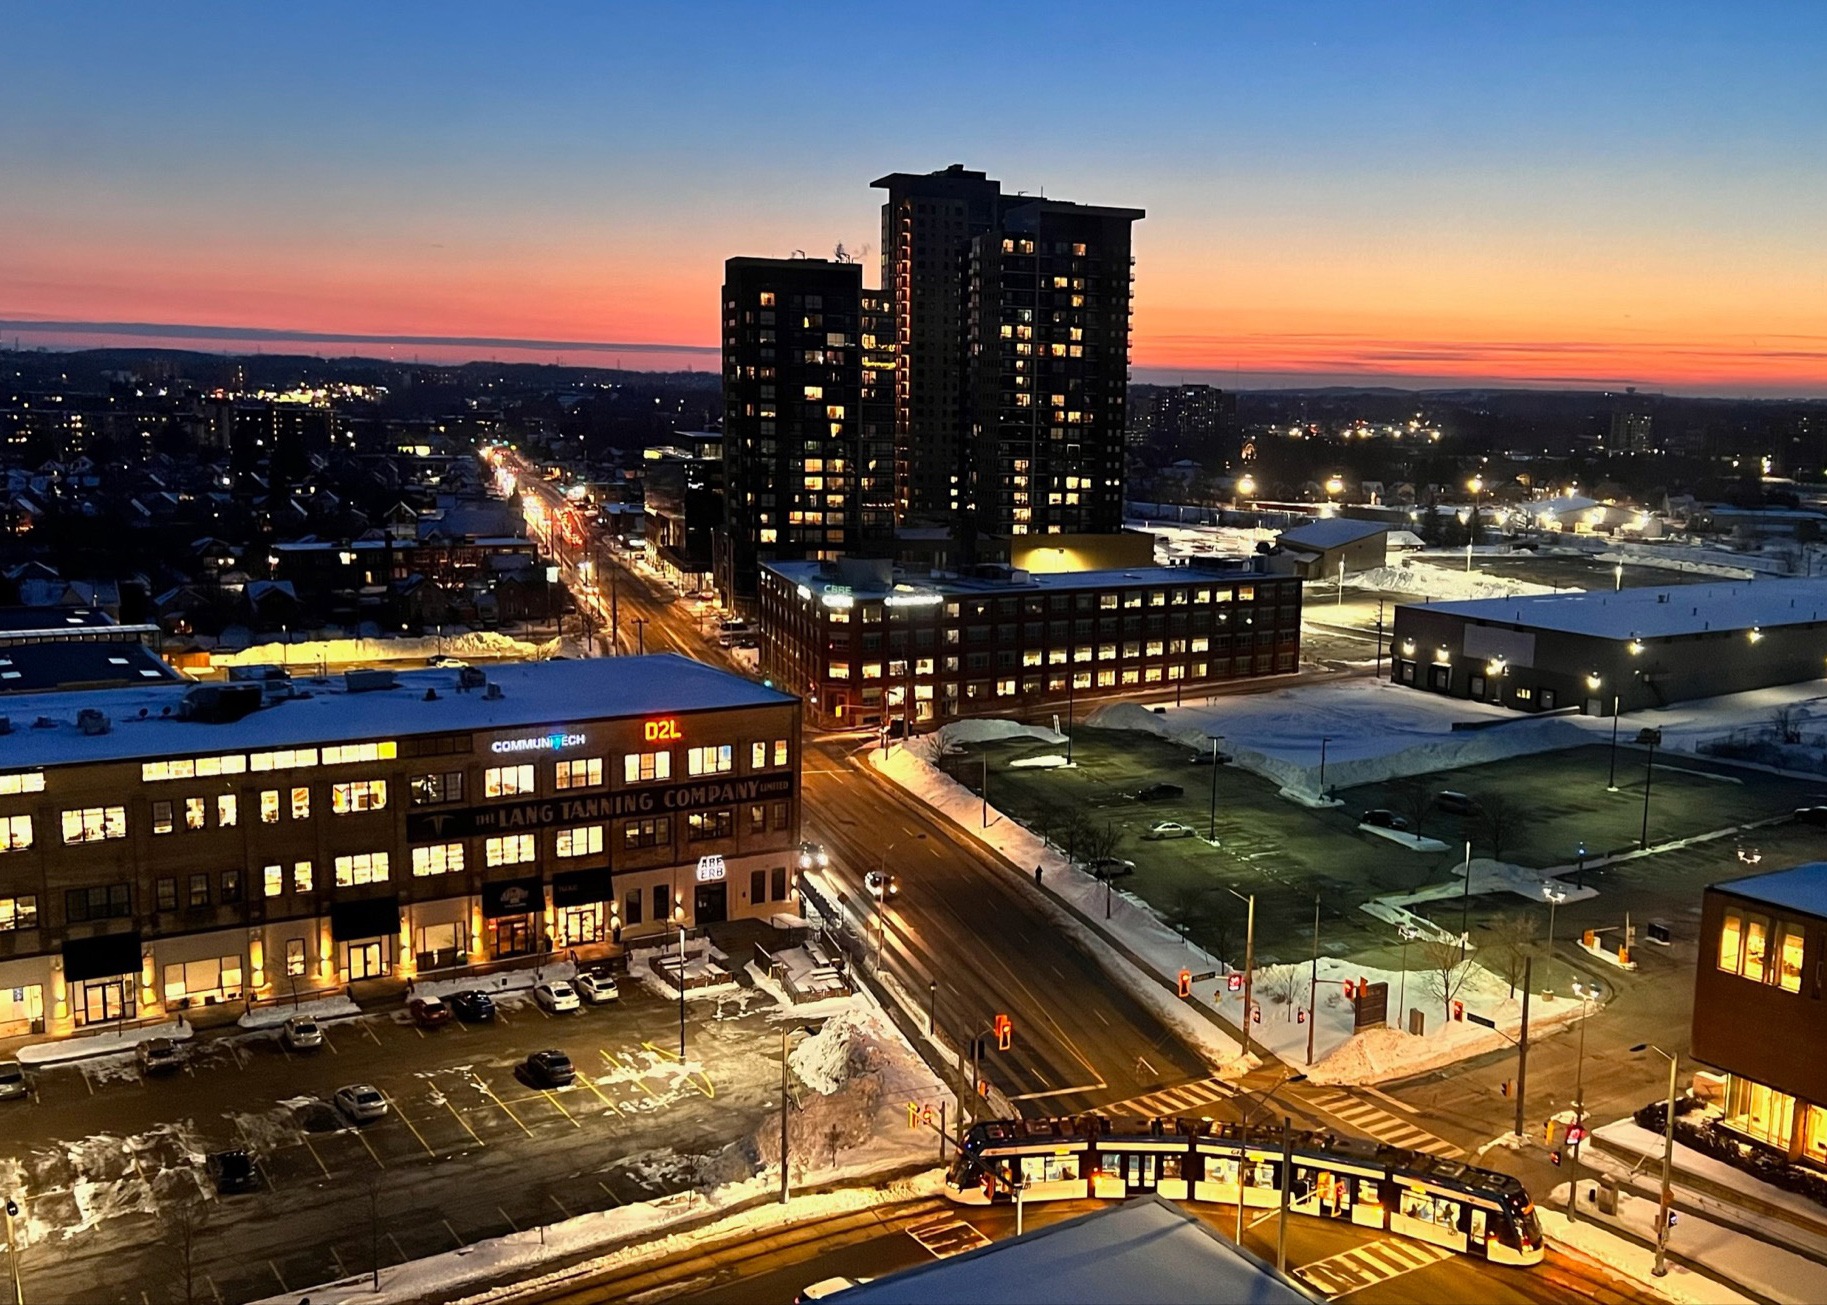 Evening aerial view of Kitchener's Innovation District. GSP Group's office at 72 Victoria Street is central to the image with three condo towers behind and the ION light rail transit passing by in the foreground.